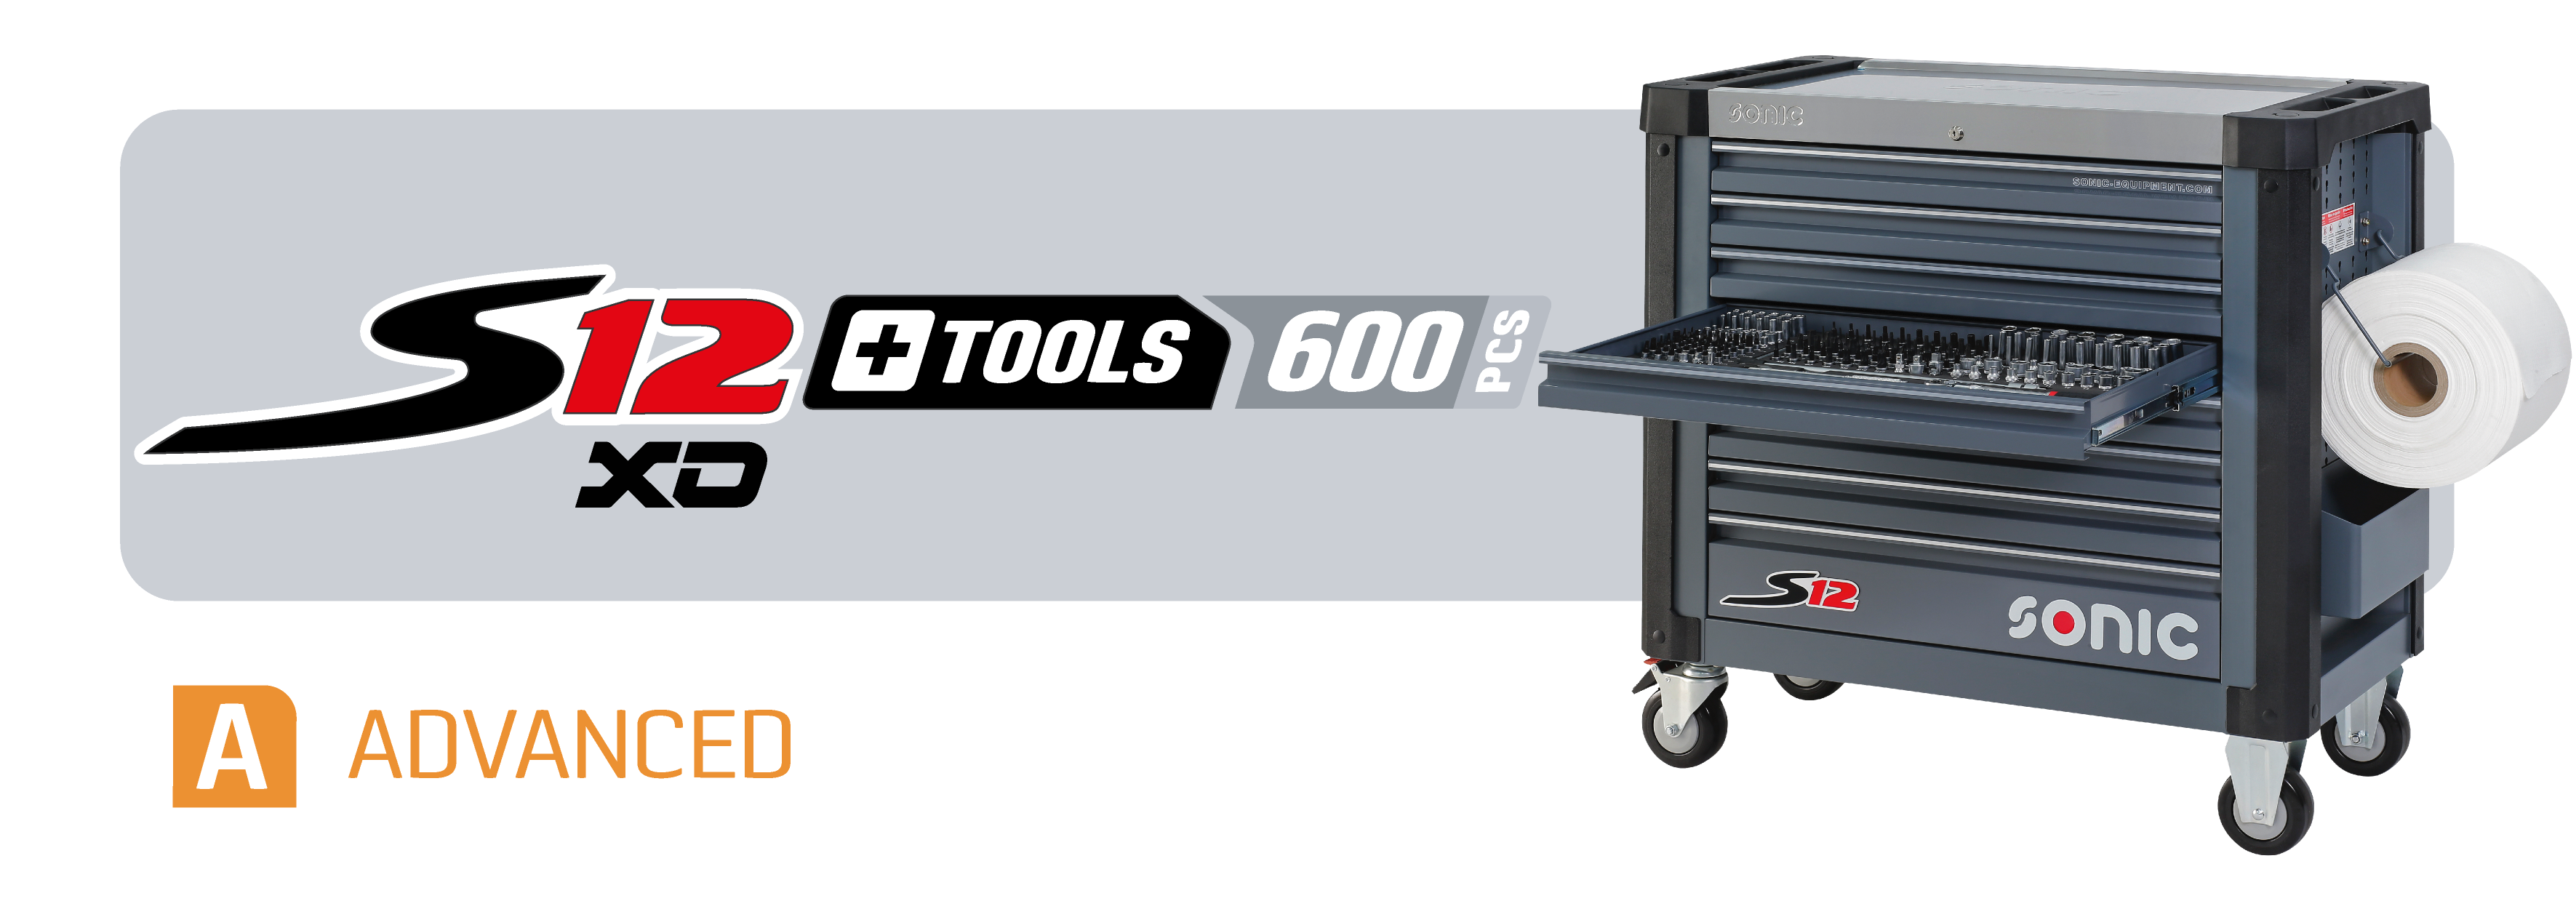 S12 XD toolbox with tools 